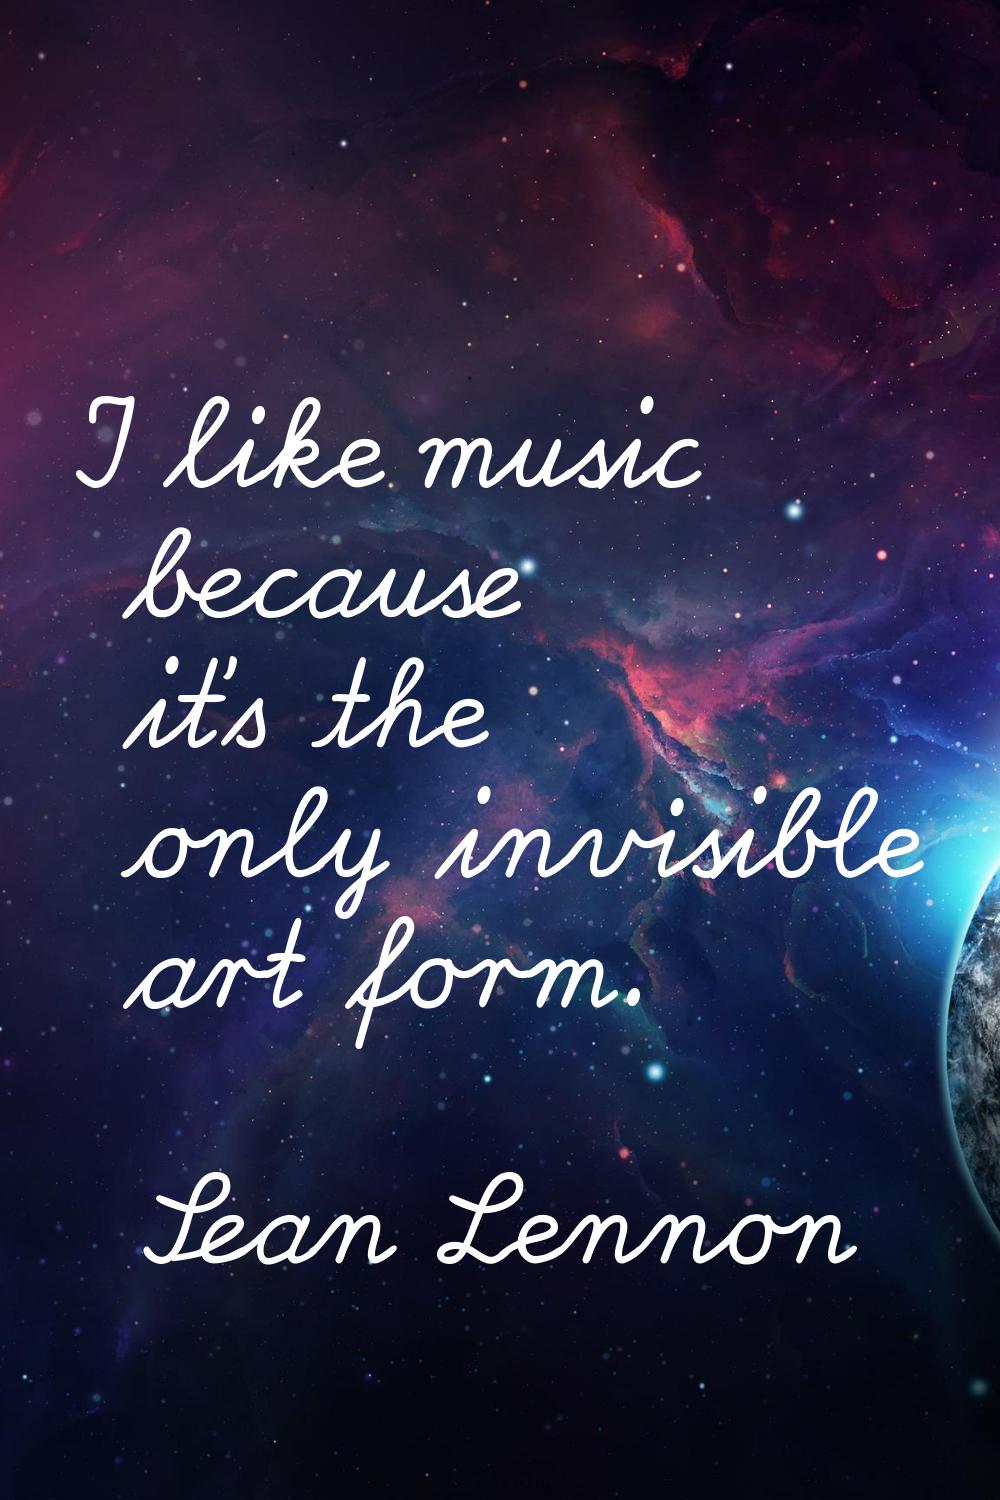 I like music because it's the only invisible art form.